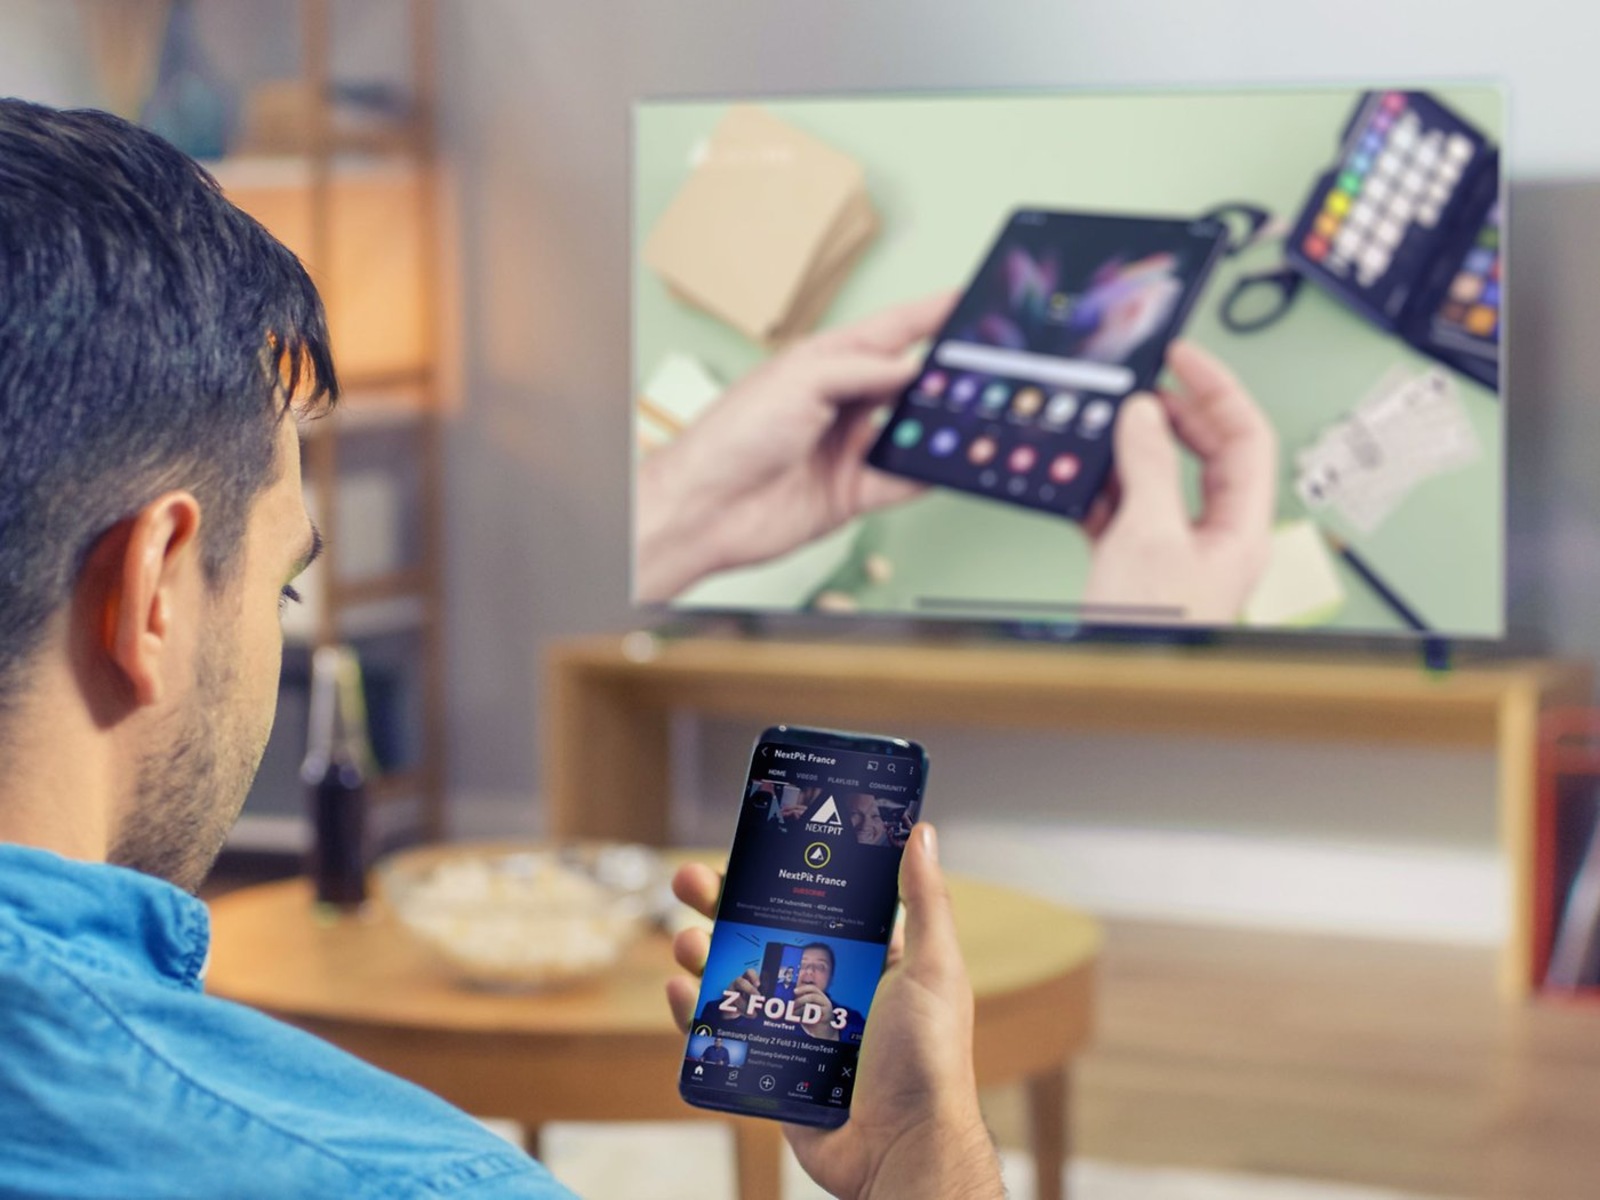 How To Connect My Smartphone To My Smart TV